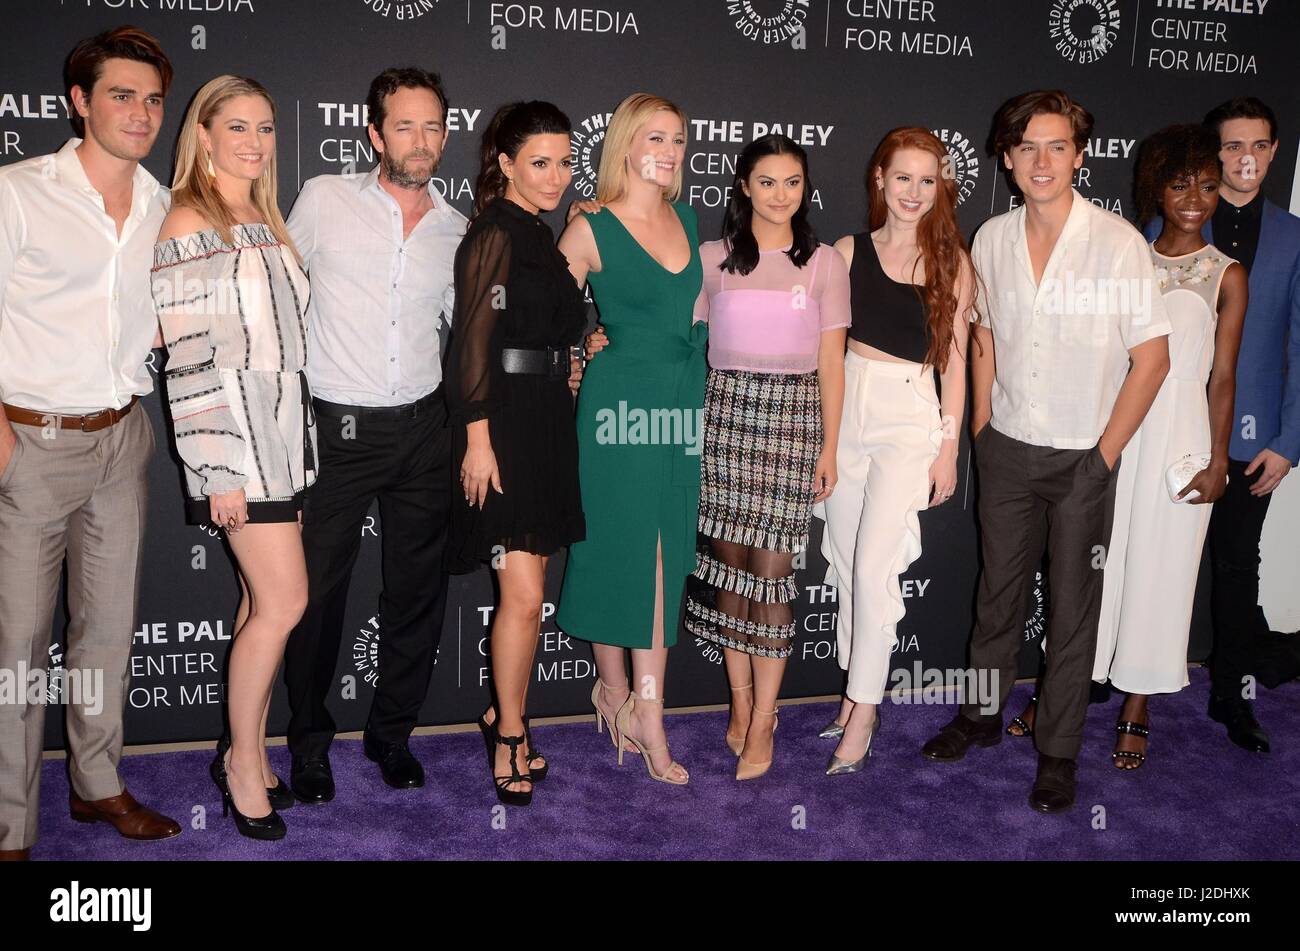 Beverly Hills, CA. 27th Apr, 2017. KJ Apa, Madchen Amick, Luke Perry, Marisol Nichols, Lili Reinhart, Camila Mendes, Madelaine Petsch, Cole Sprouse, Ashleigh Murray, Casey Cott at arrivals for The CW's RIVERDALE Screening and Conversation, The Paley Center for Media, Beverly Hills, CA April 27, 2017. Credit: Priscilla Grant/Everett Collection/Alamy Live News Stock Photo